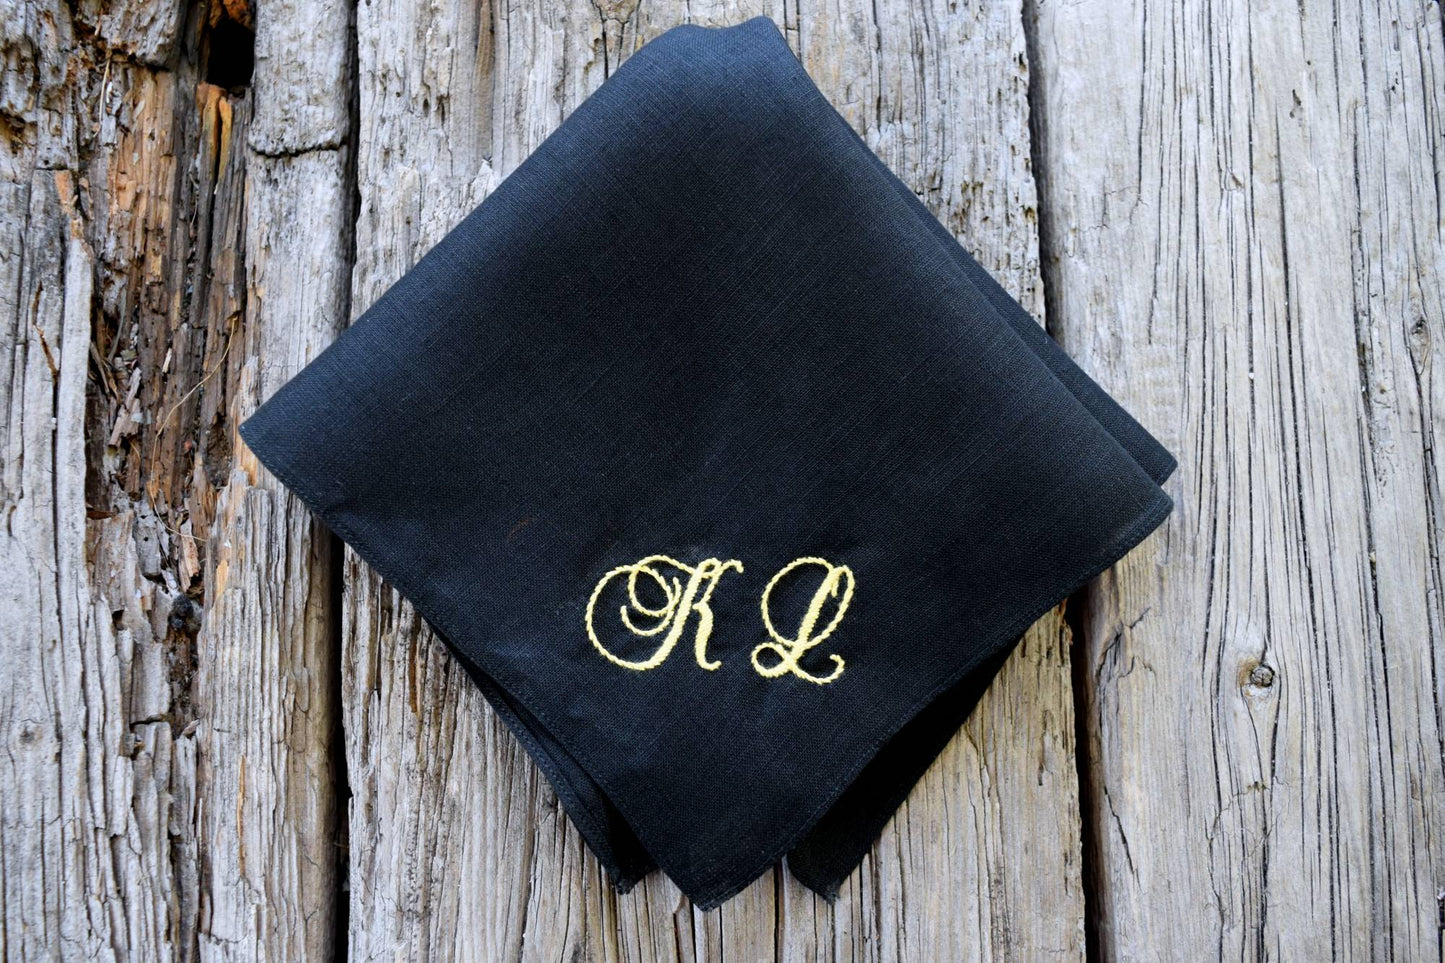 Black pocket square customized with yellow K L in antique script